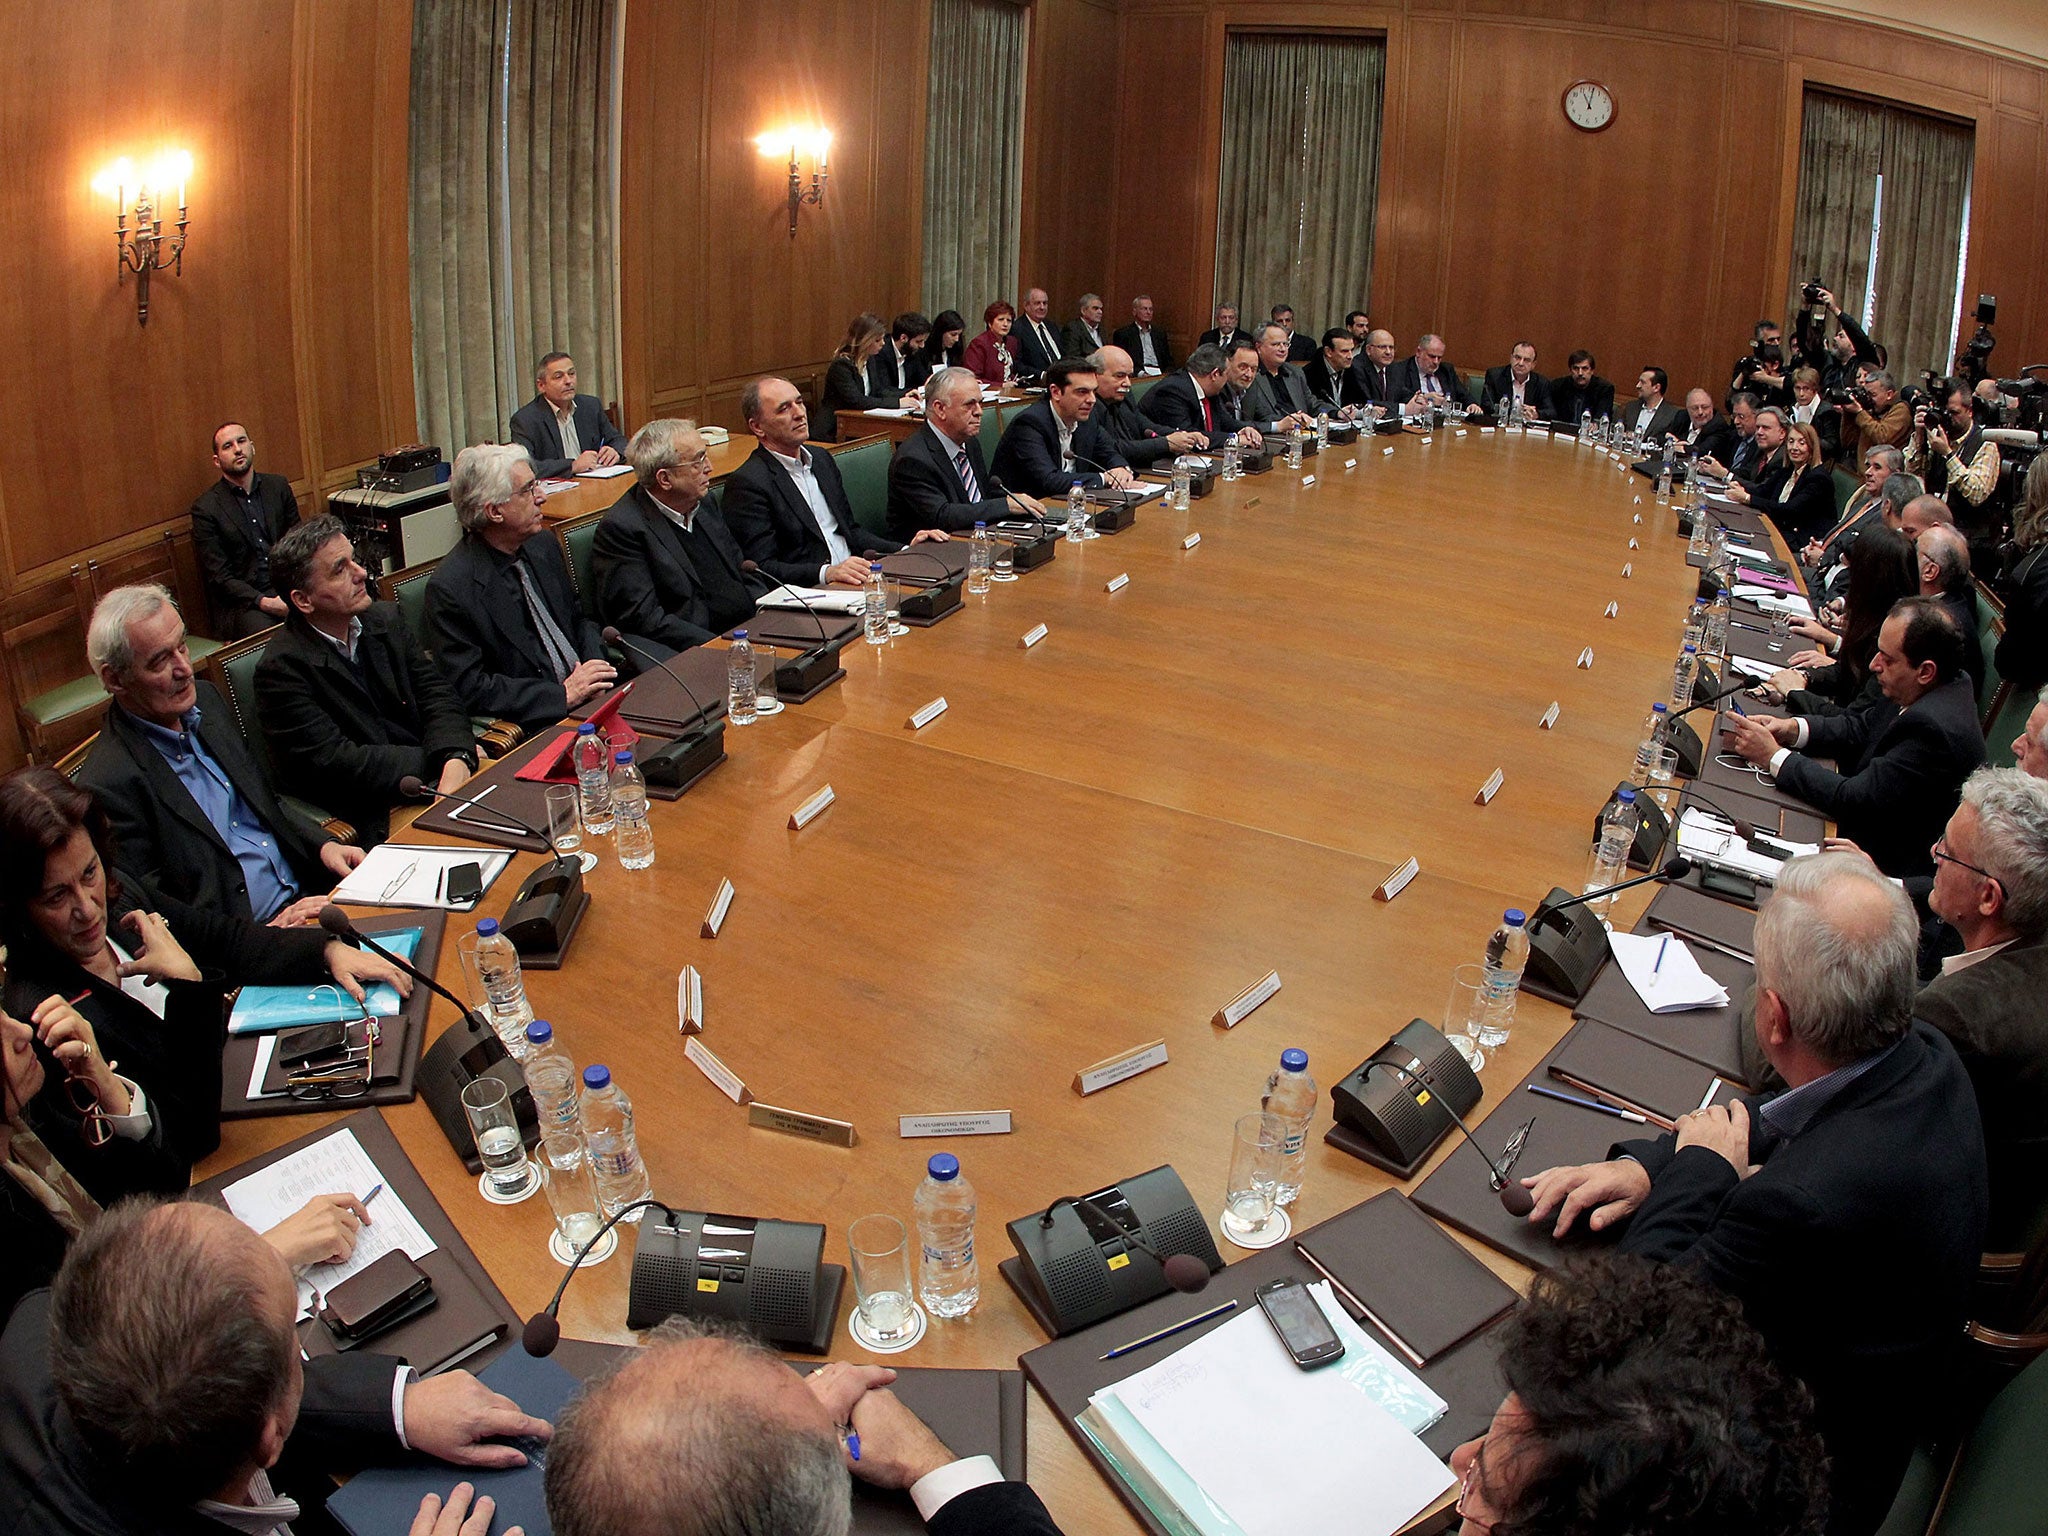 Greek Prime Minister Alexis Tsipras chairs the first cabinet meeting of the government in the Parliament, in Athens, Greece, on 28 January 2015